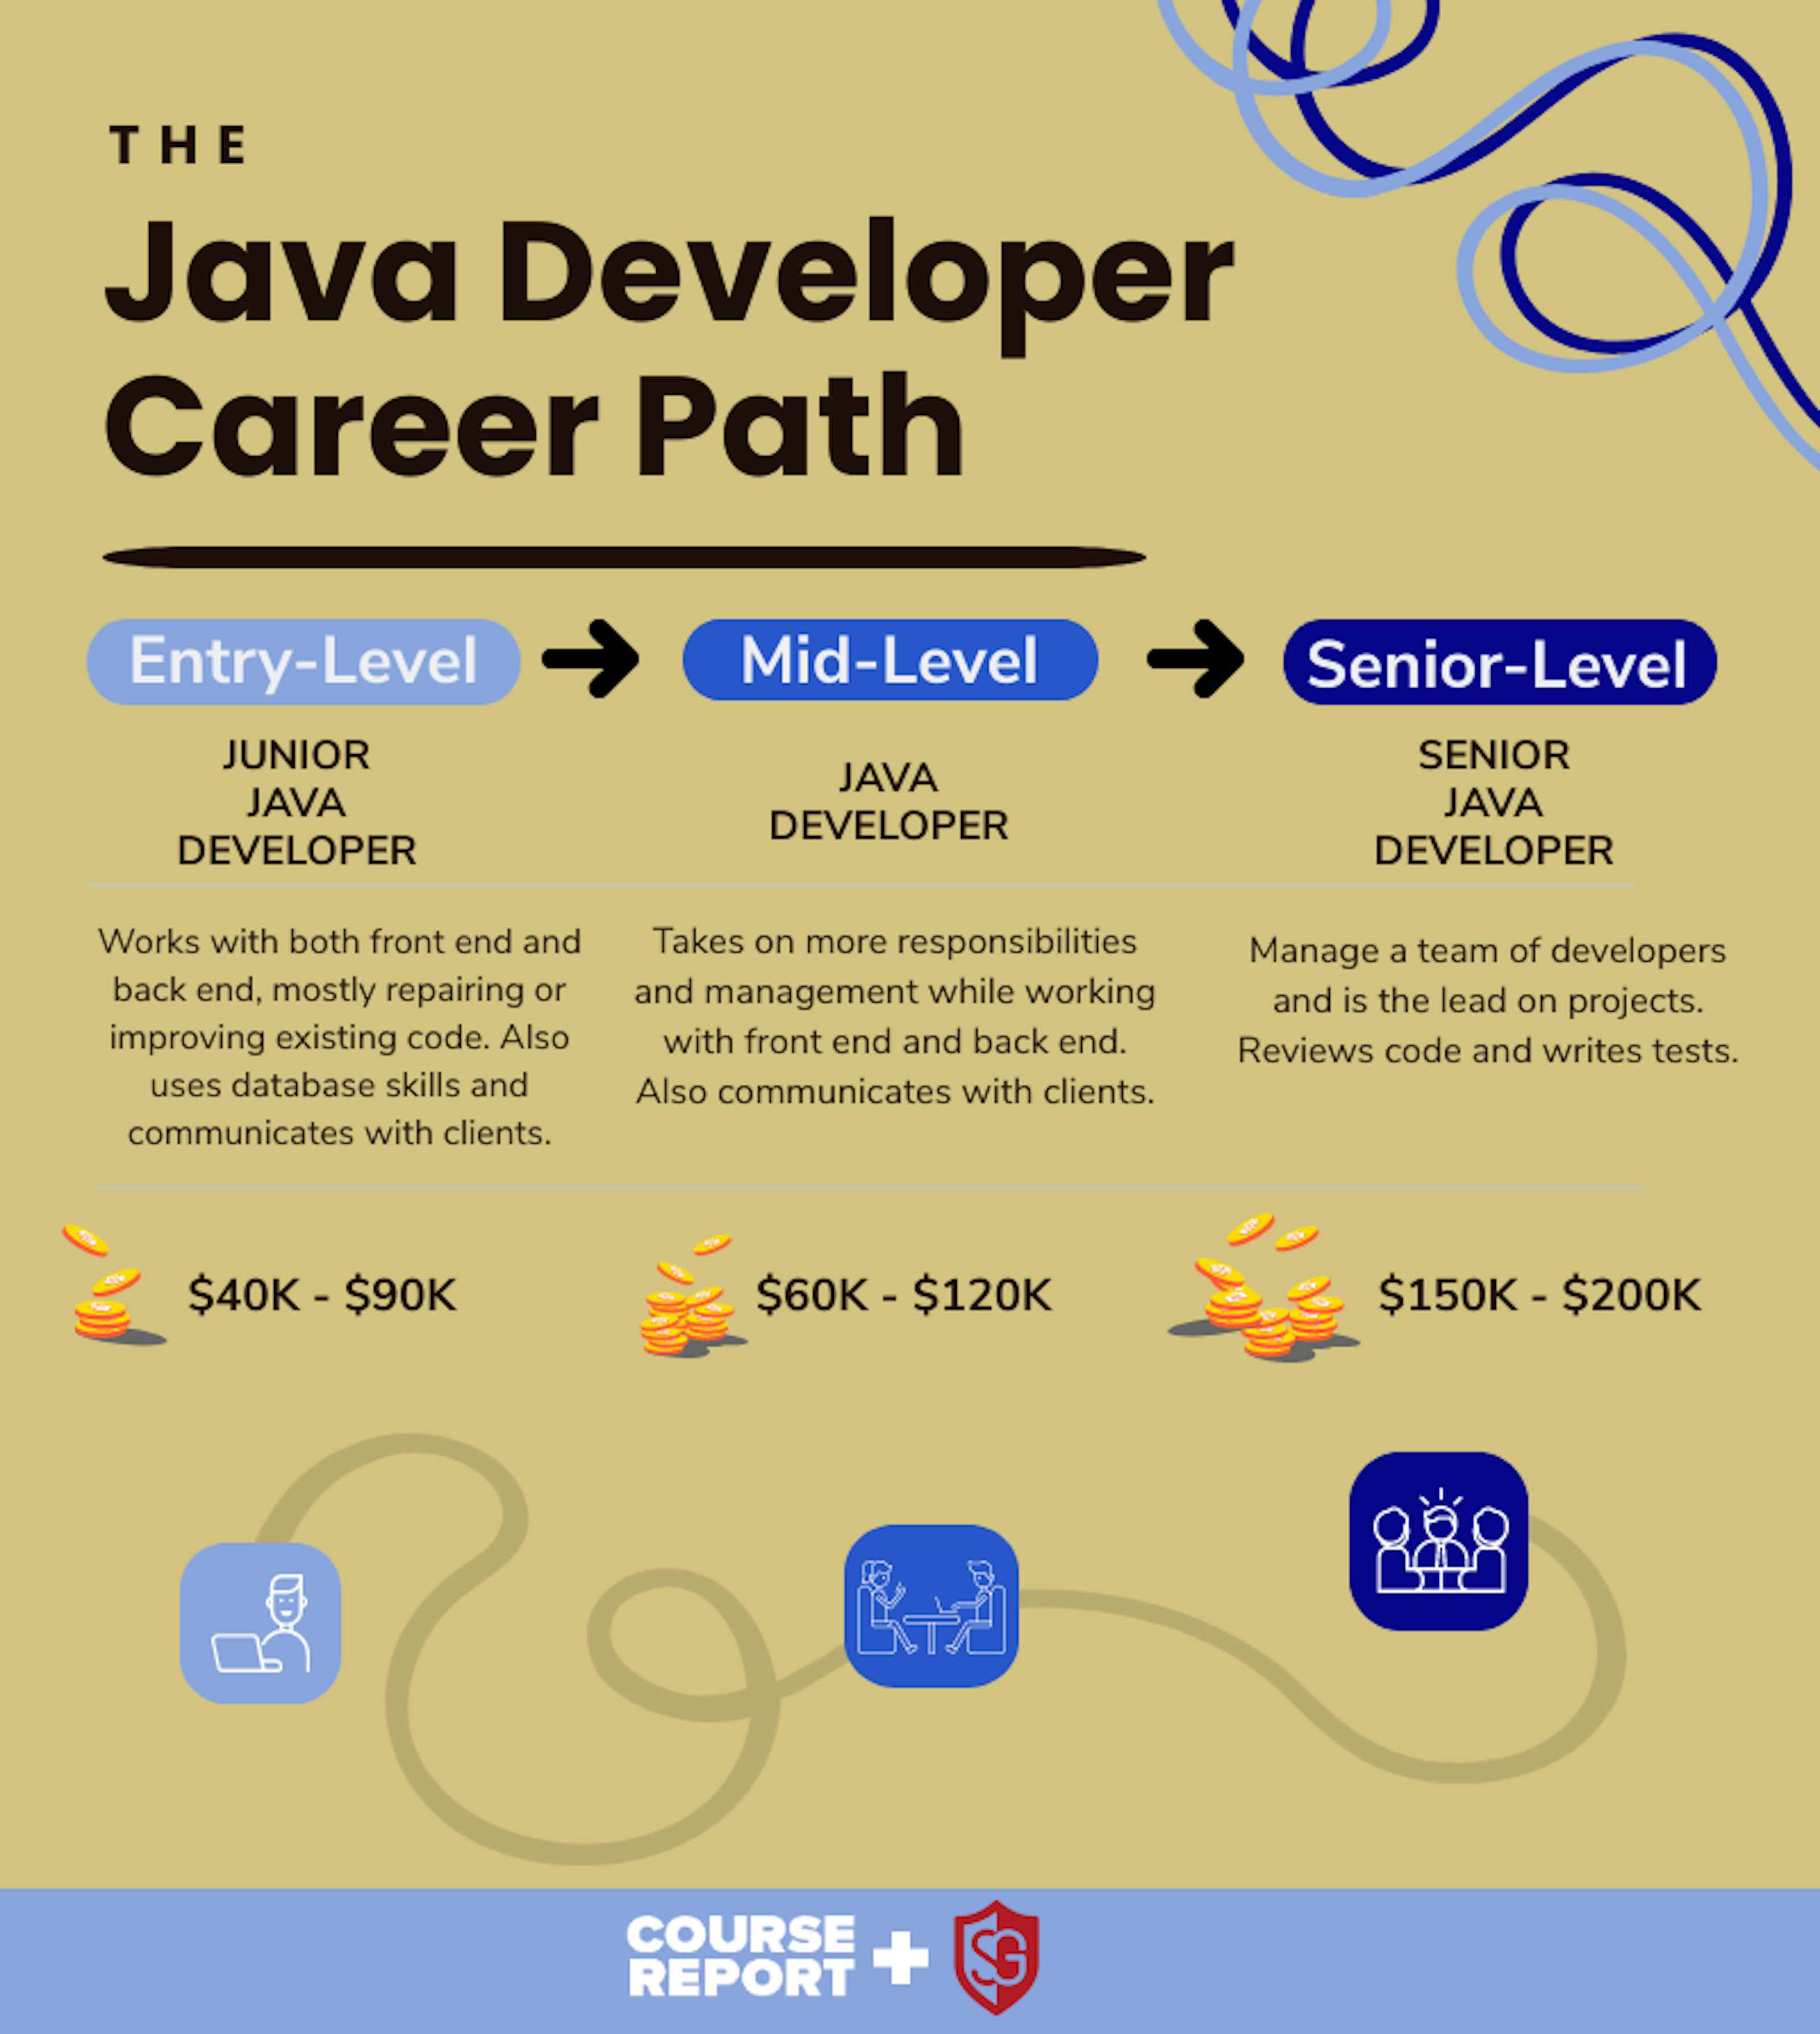 The Java Developer Jobs & Salary Guide + Career Path Course Report